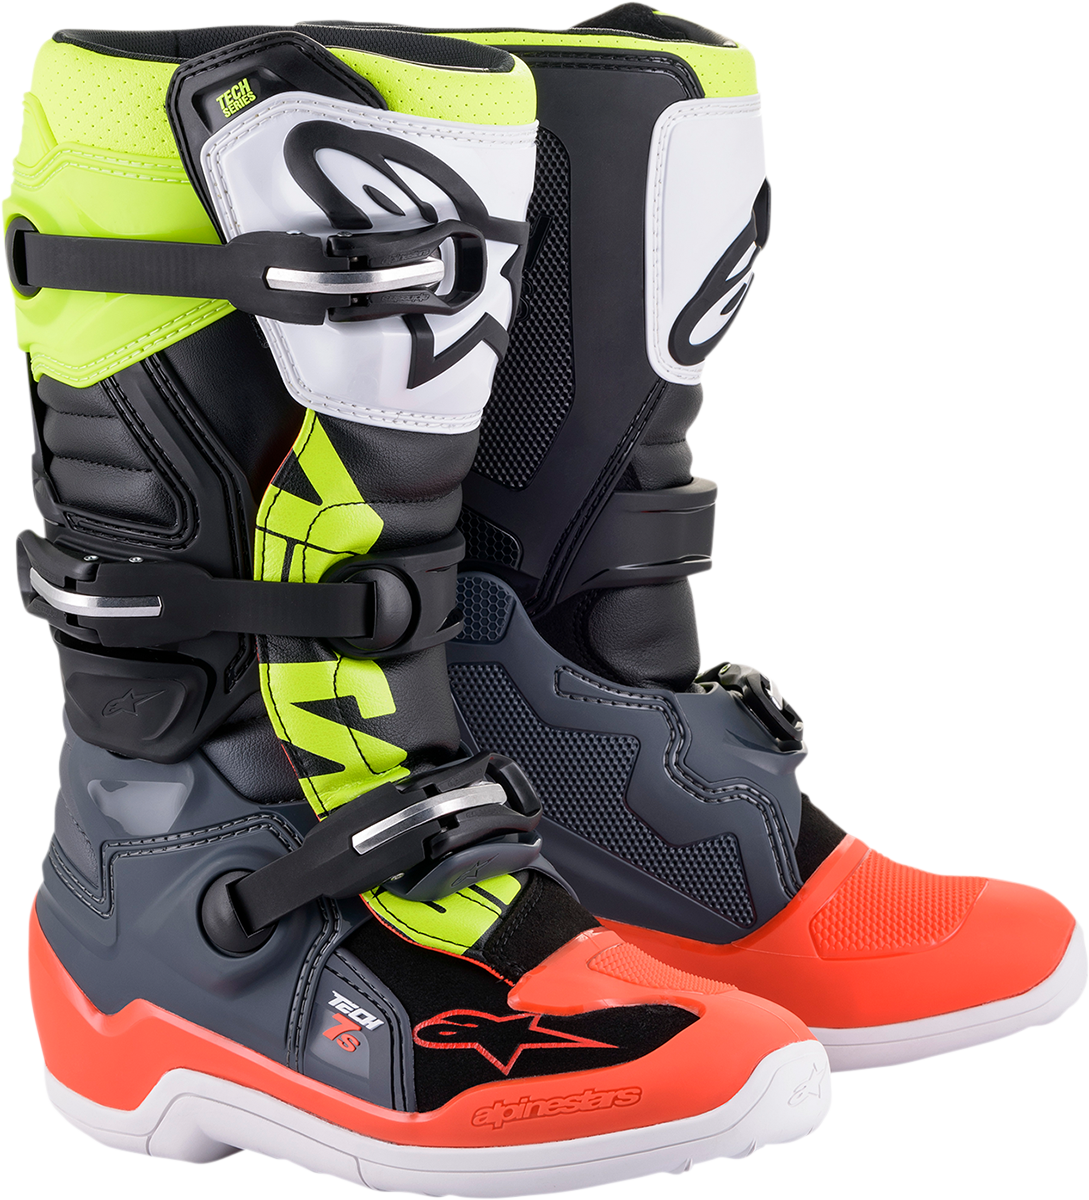 ALPINESTARS Youth Tech 7S Boots - Black/Gray/Red/White/Yellow - US 8 2015017-9058-8